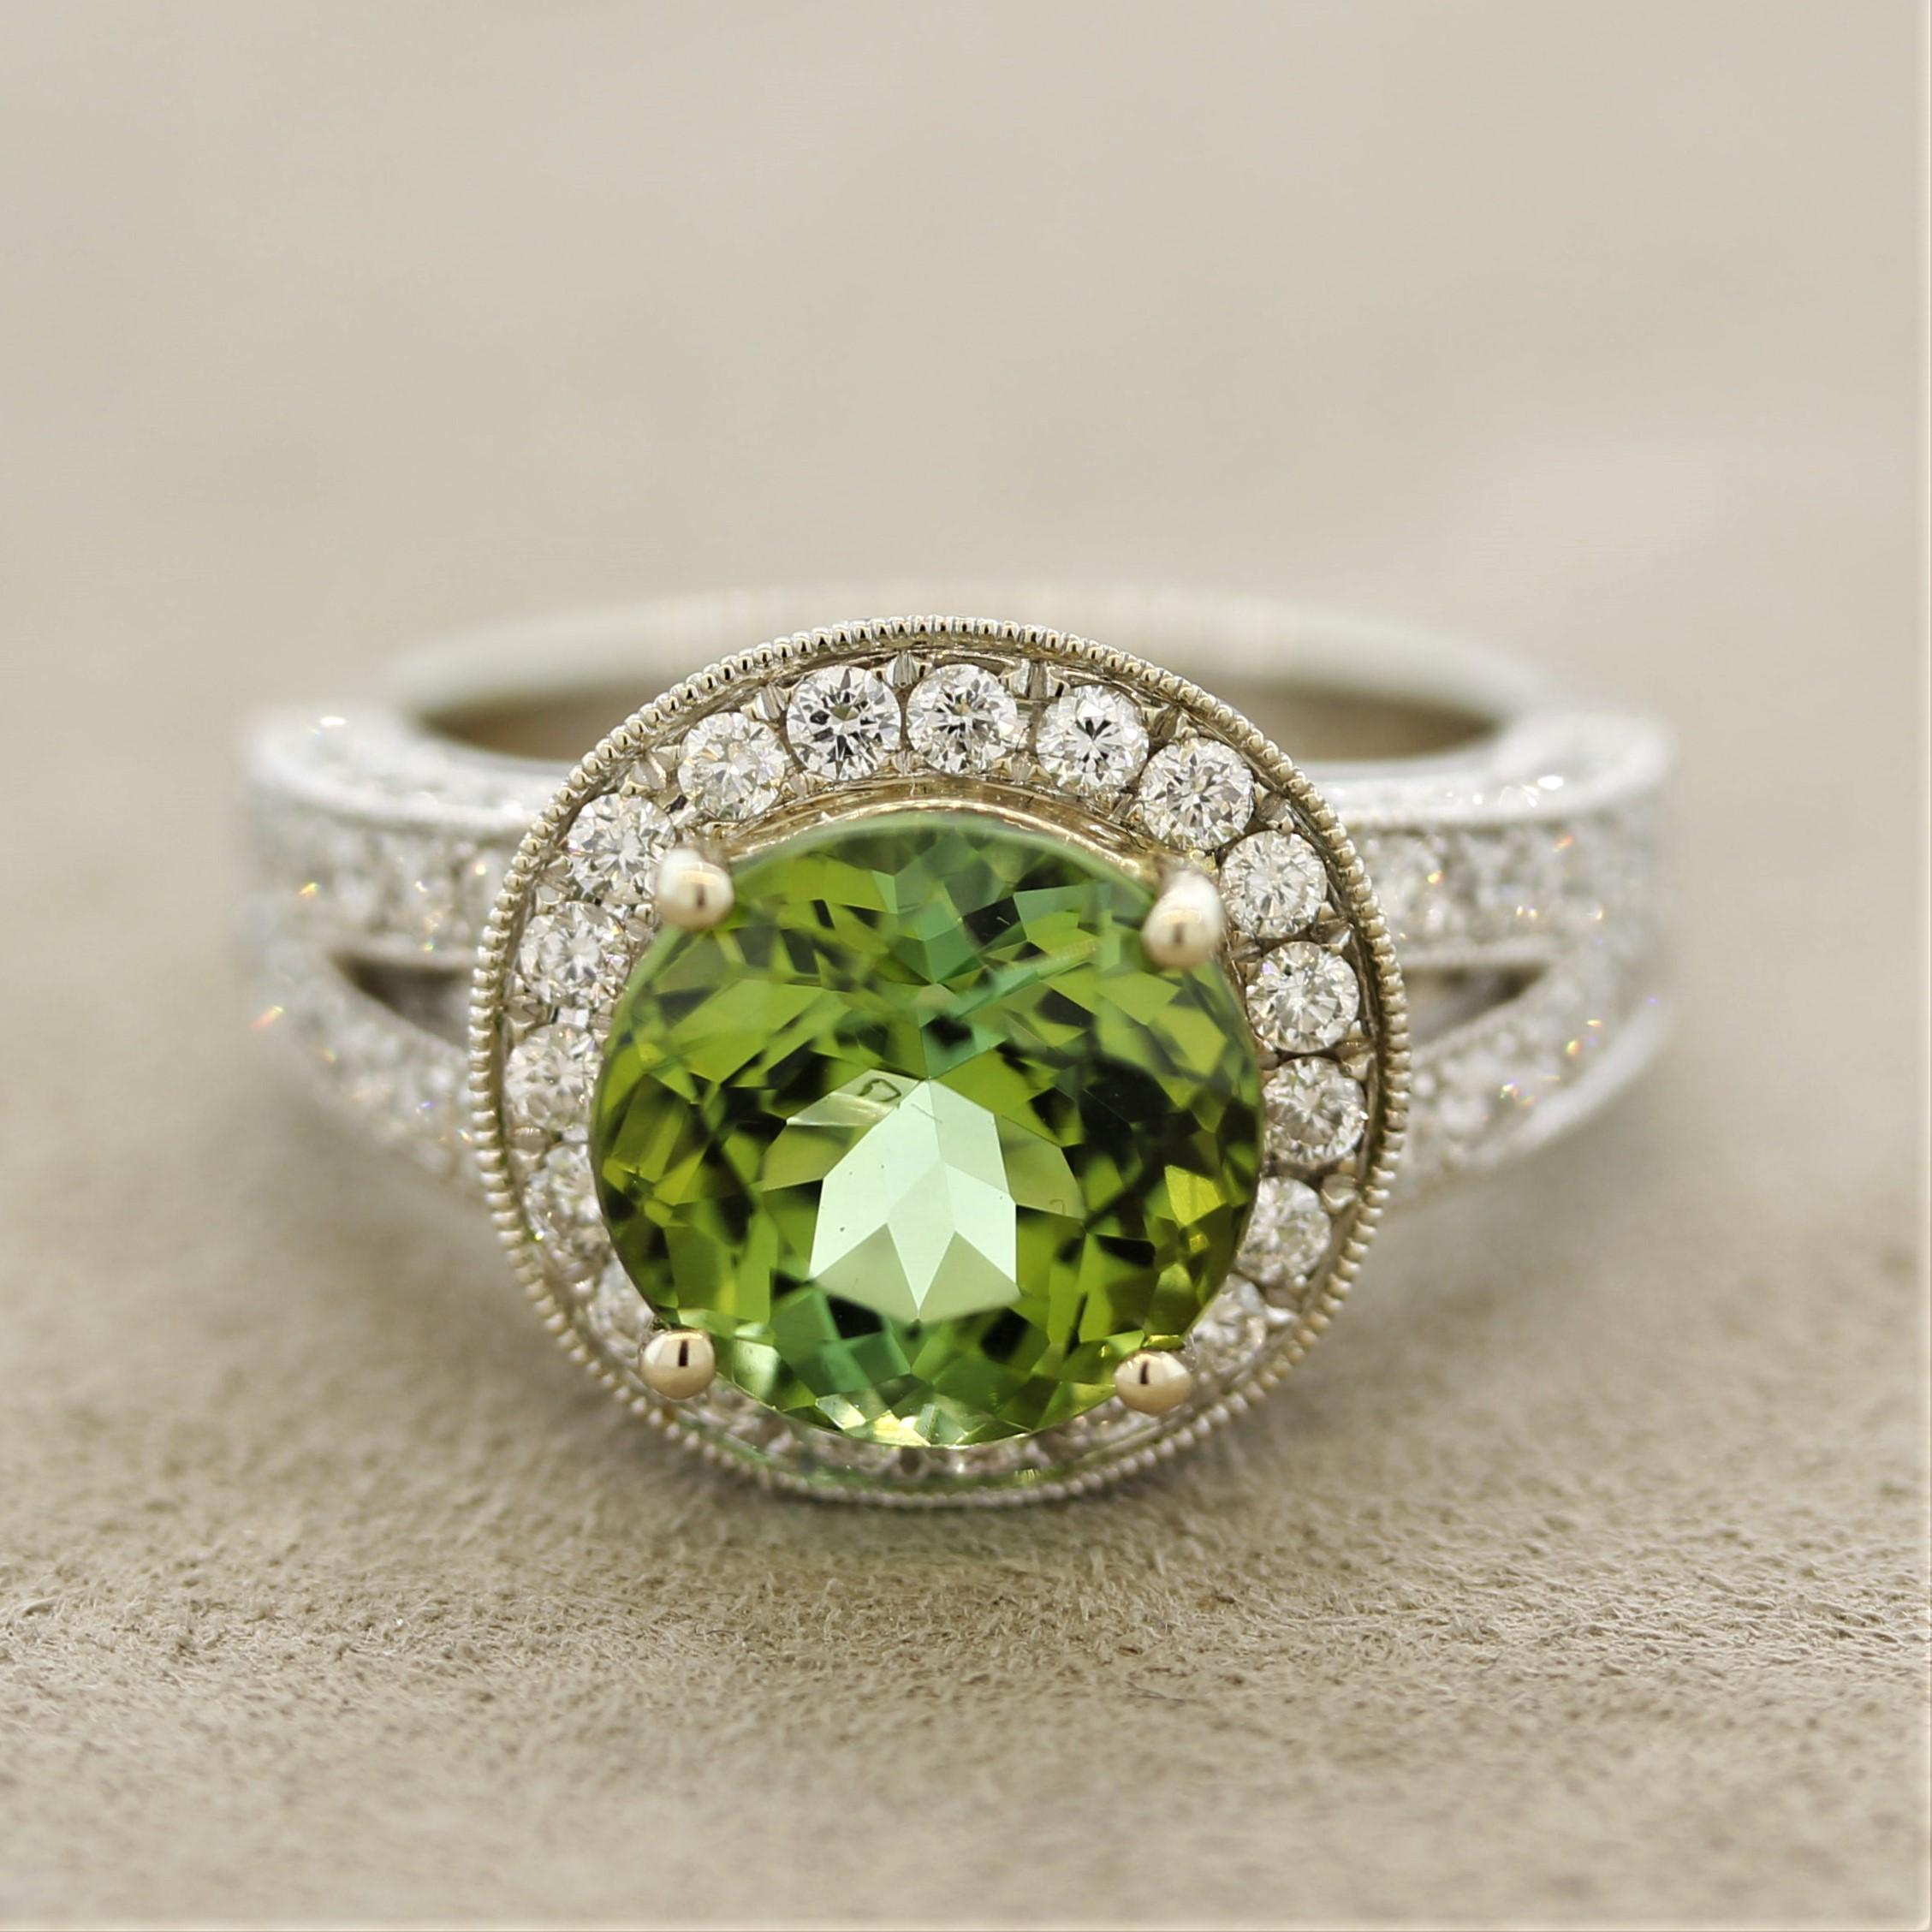 A gem 4.46 carat vivid green colored tourmaline, with subtle hints of yellow and blue, take center stage. It is accented by 1.62 carats of round brilliant-cut diamonds set around the tourmaline and down the shoulders of the ring. Made in 18k white